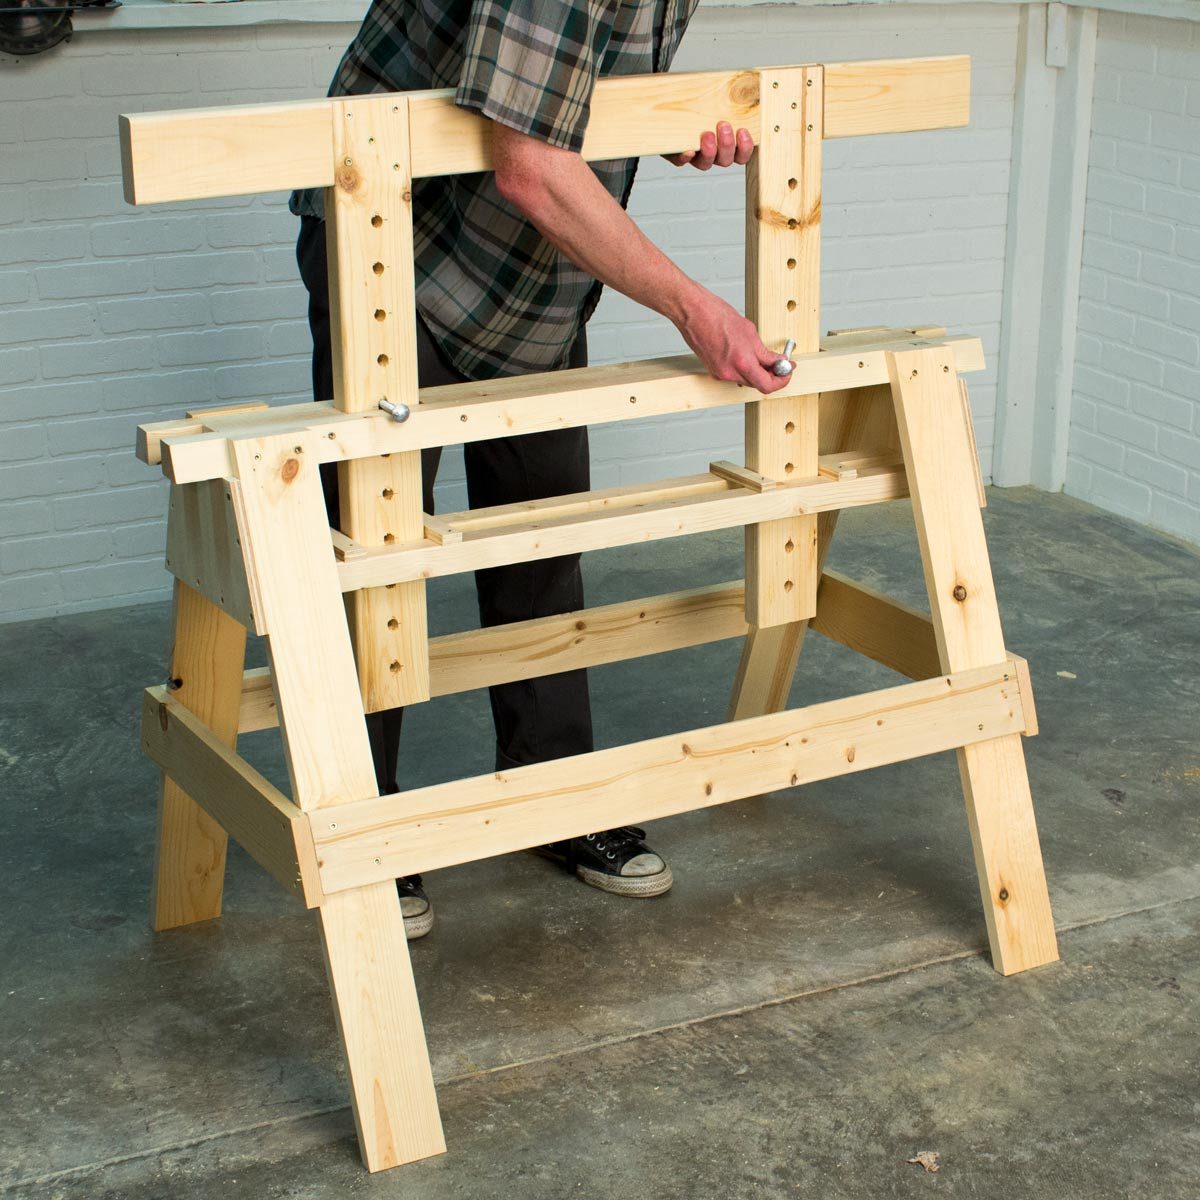 Saturday Morning Workshop: How To Build An Adjustable Sawhorse